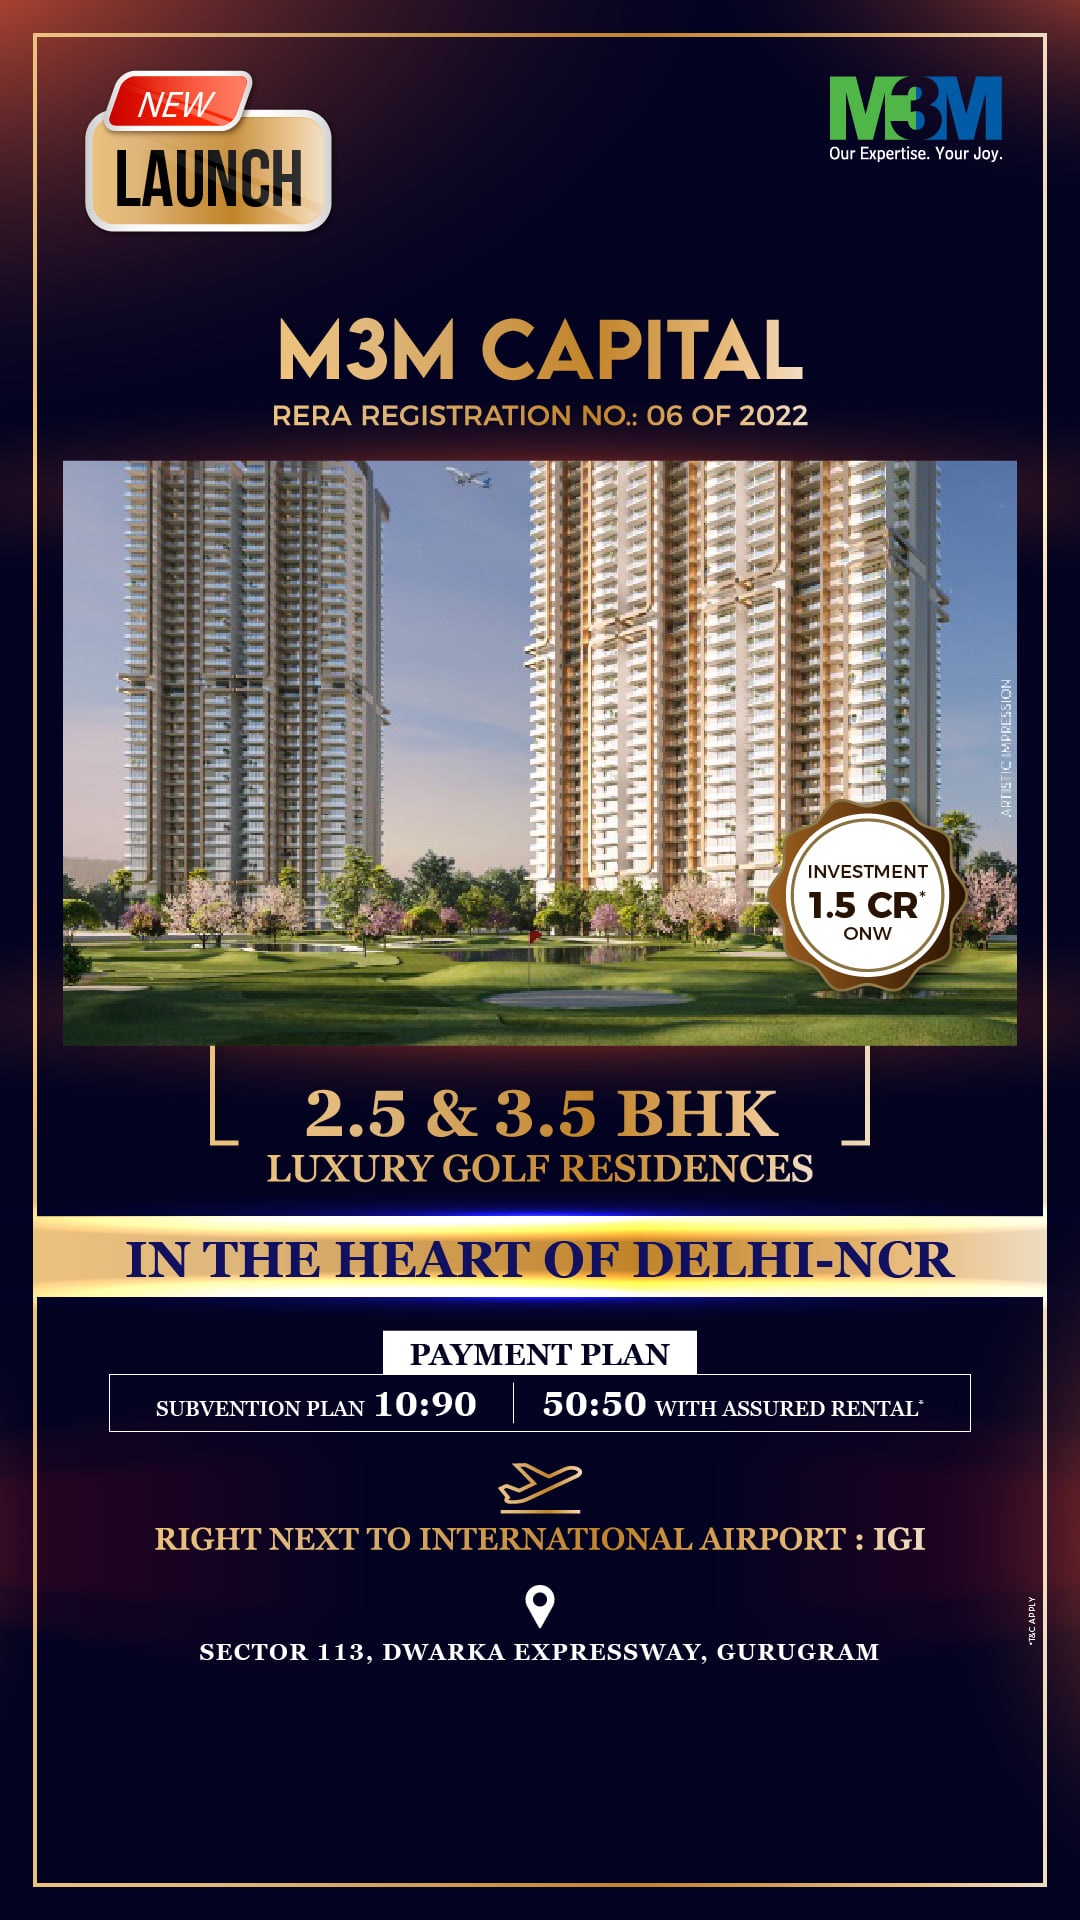 Book 2.5 & 3.5 BHK luxury golf residences at M3M Capital in Sector 113, Gurgaon Update